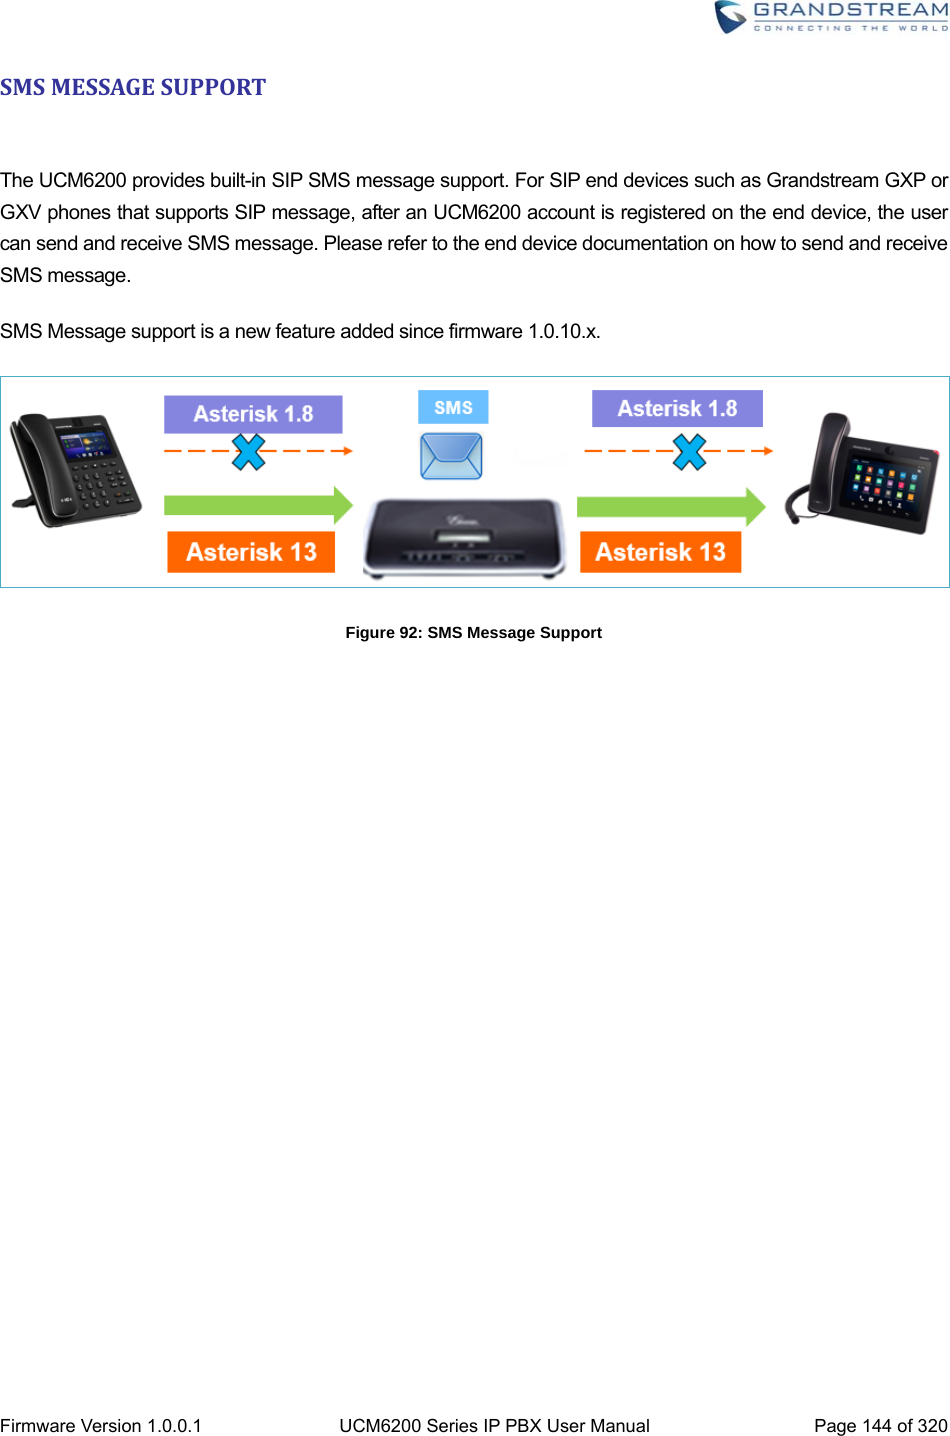  Firmware Version 1.0.0.1  UCM6200 Series IP PBX User Manual  Page 144 of 320 SMSMESSAGESUPPORT The UCM6200 provides built-in SIP SMS message support. For SIP end devices such as Grandstream GXP or GXV phones that supports SIP message, after an UCM6200 account is registered on the end device, the user can send and receive SMS message. Please refer to the end device documentation on how to send and receive SMS message. SMS Message support is a new feature added since firmware 1.0.10.x.  Figure 92: SMS Message Support     